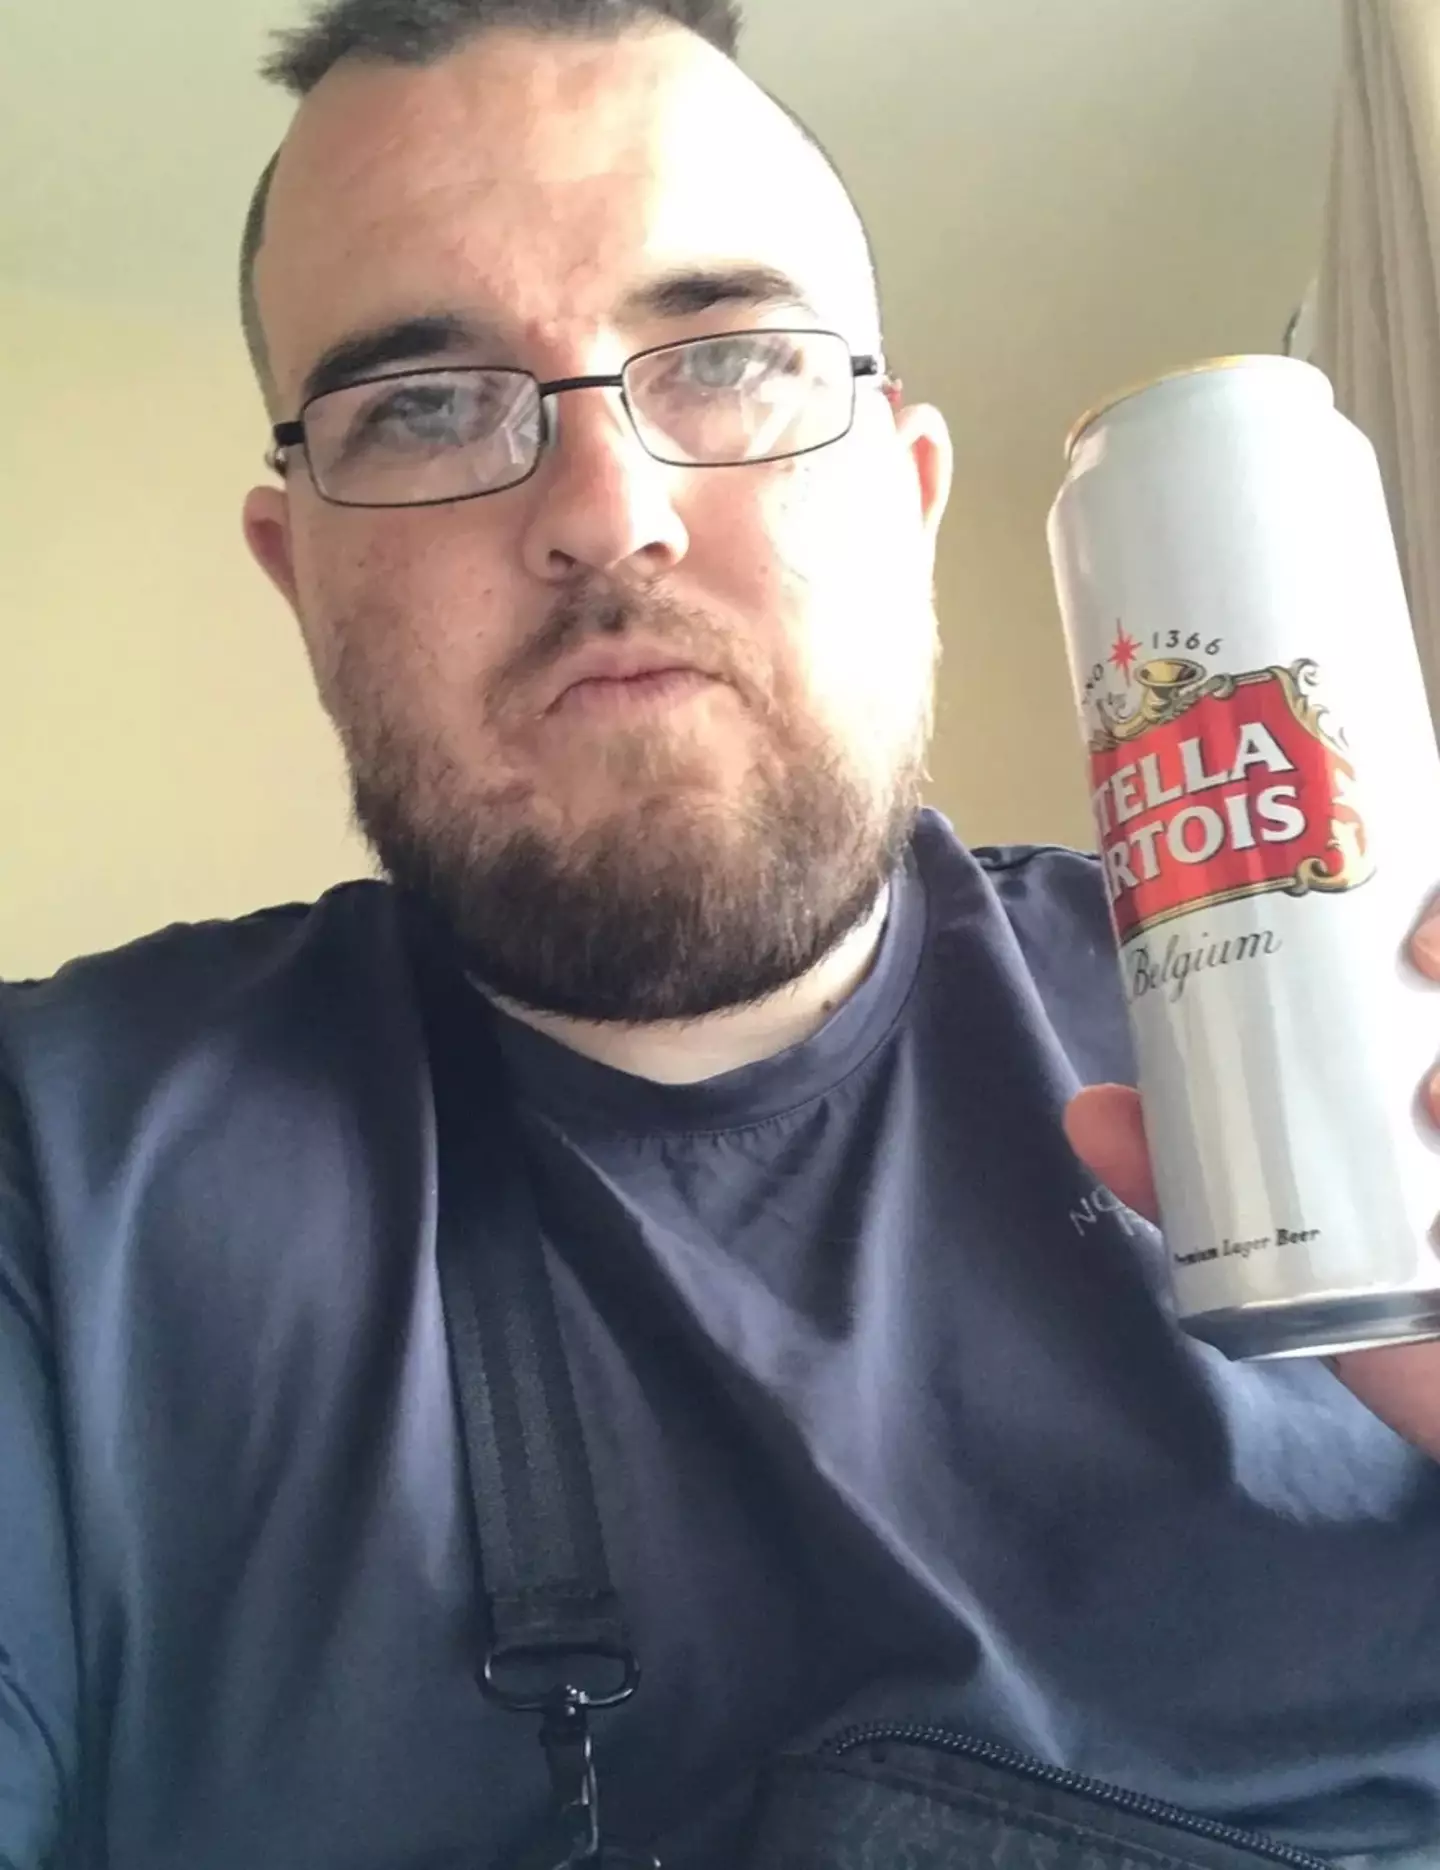 Stella Artois really is one of his favourite beers.